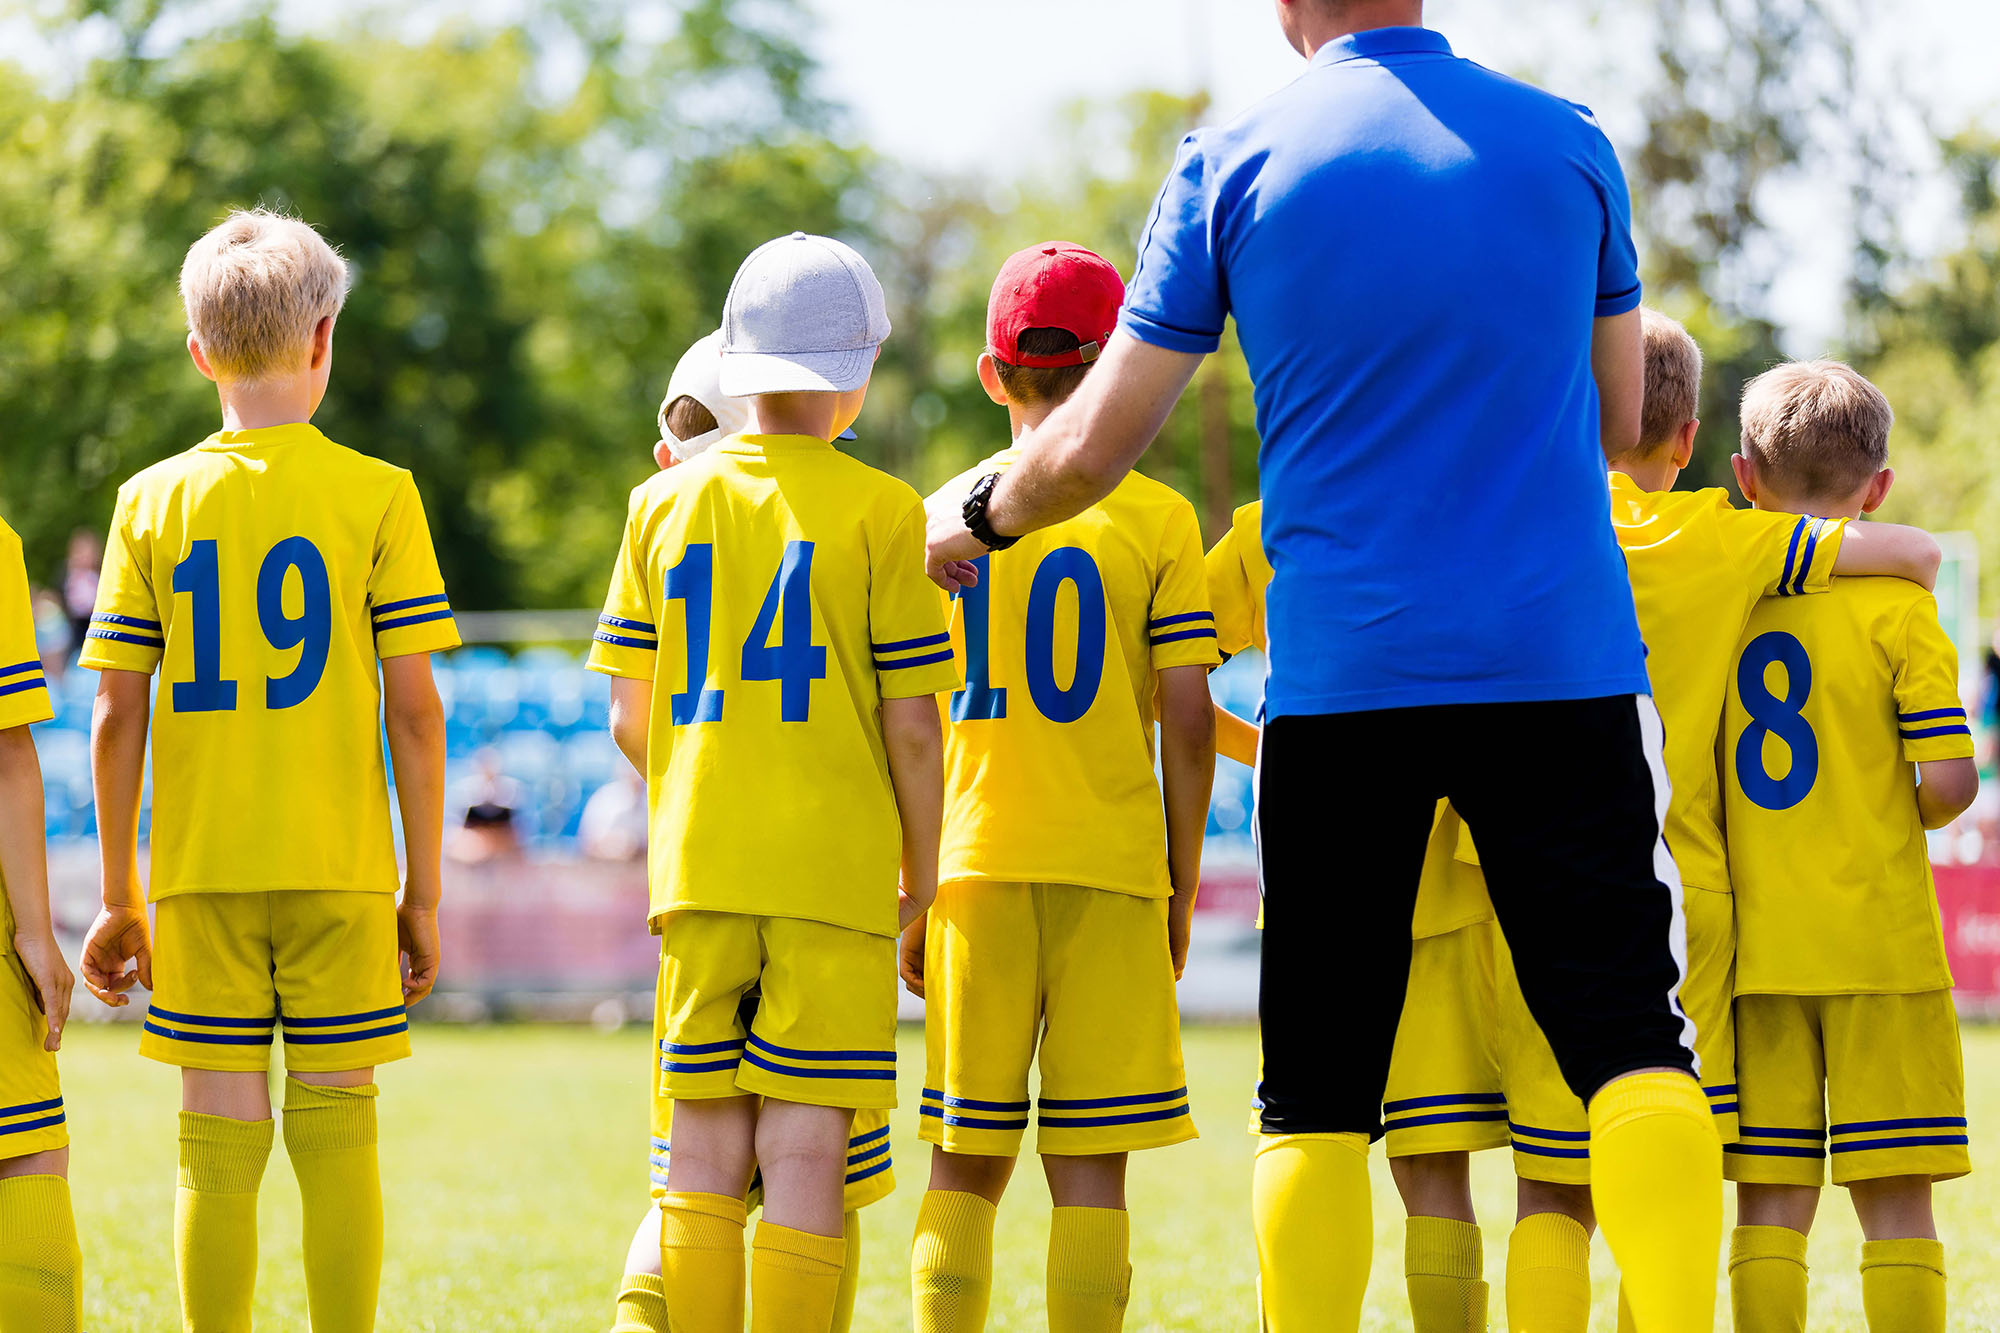 Why Are Sports Important for Children's Development?